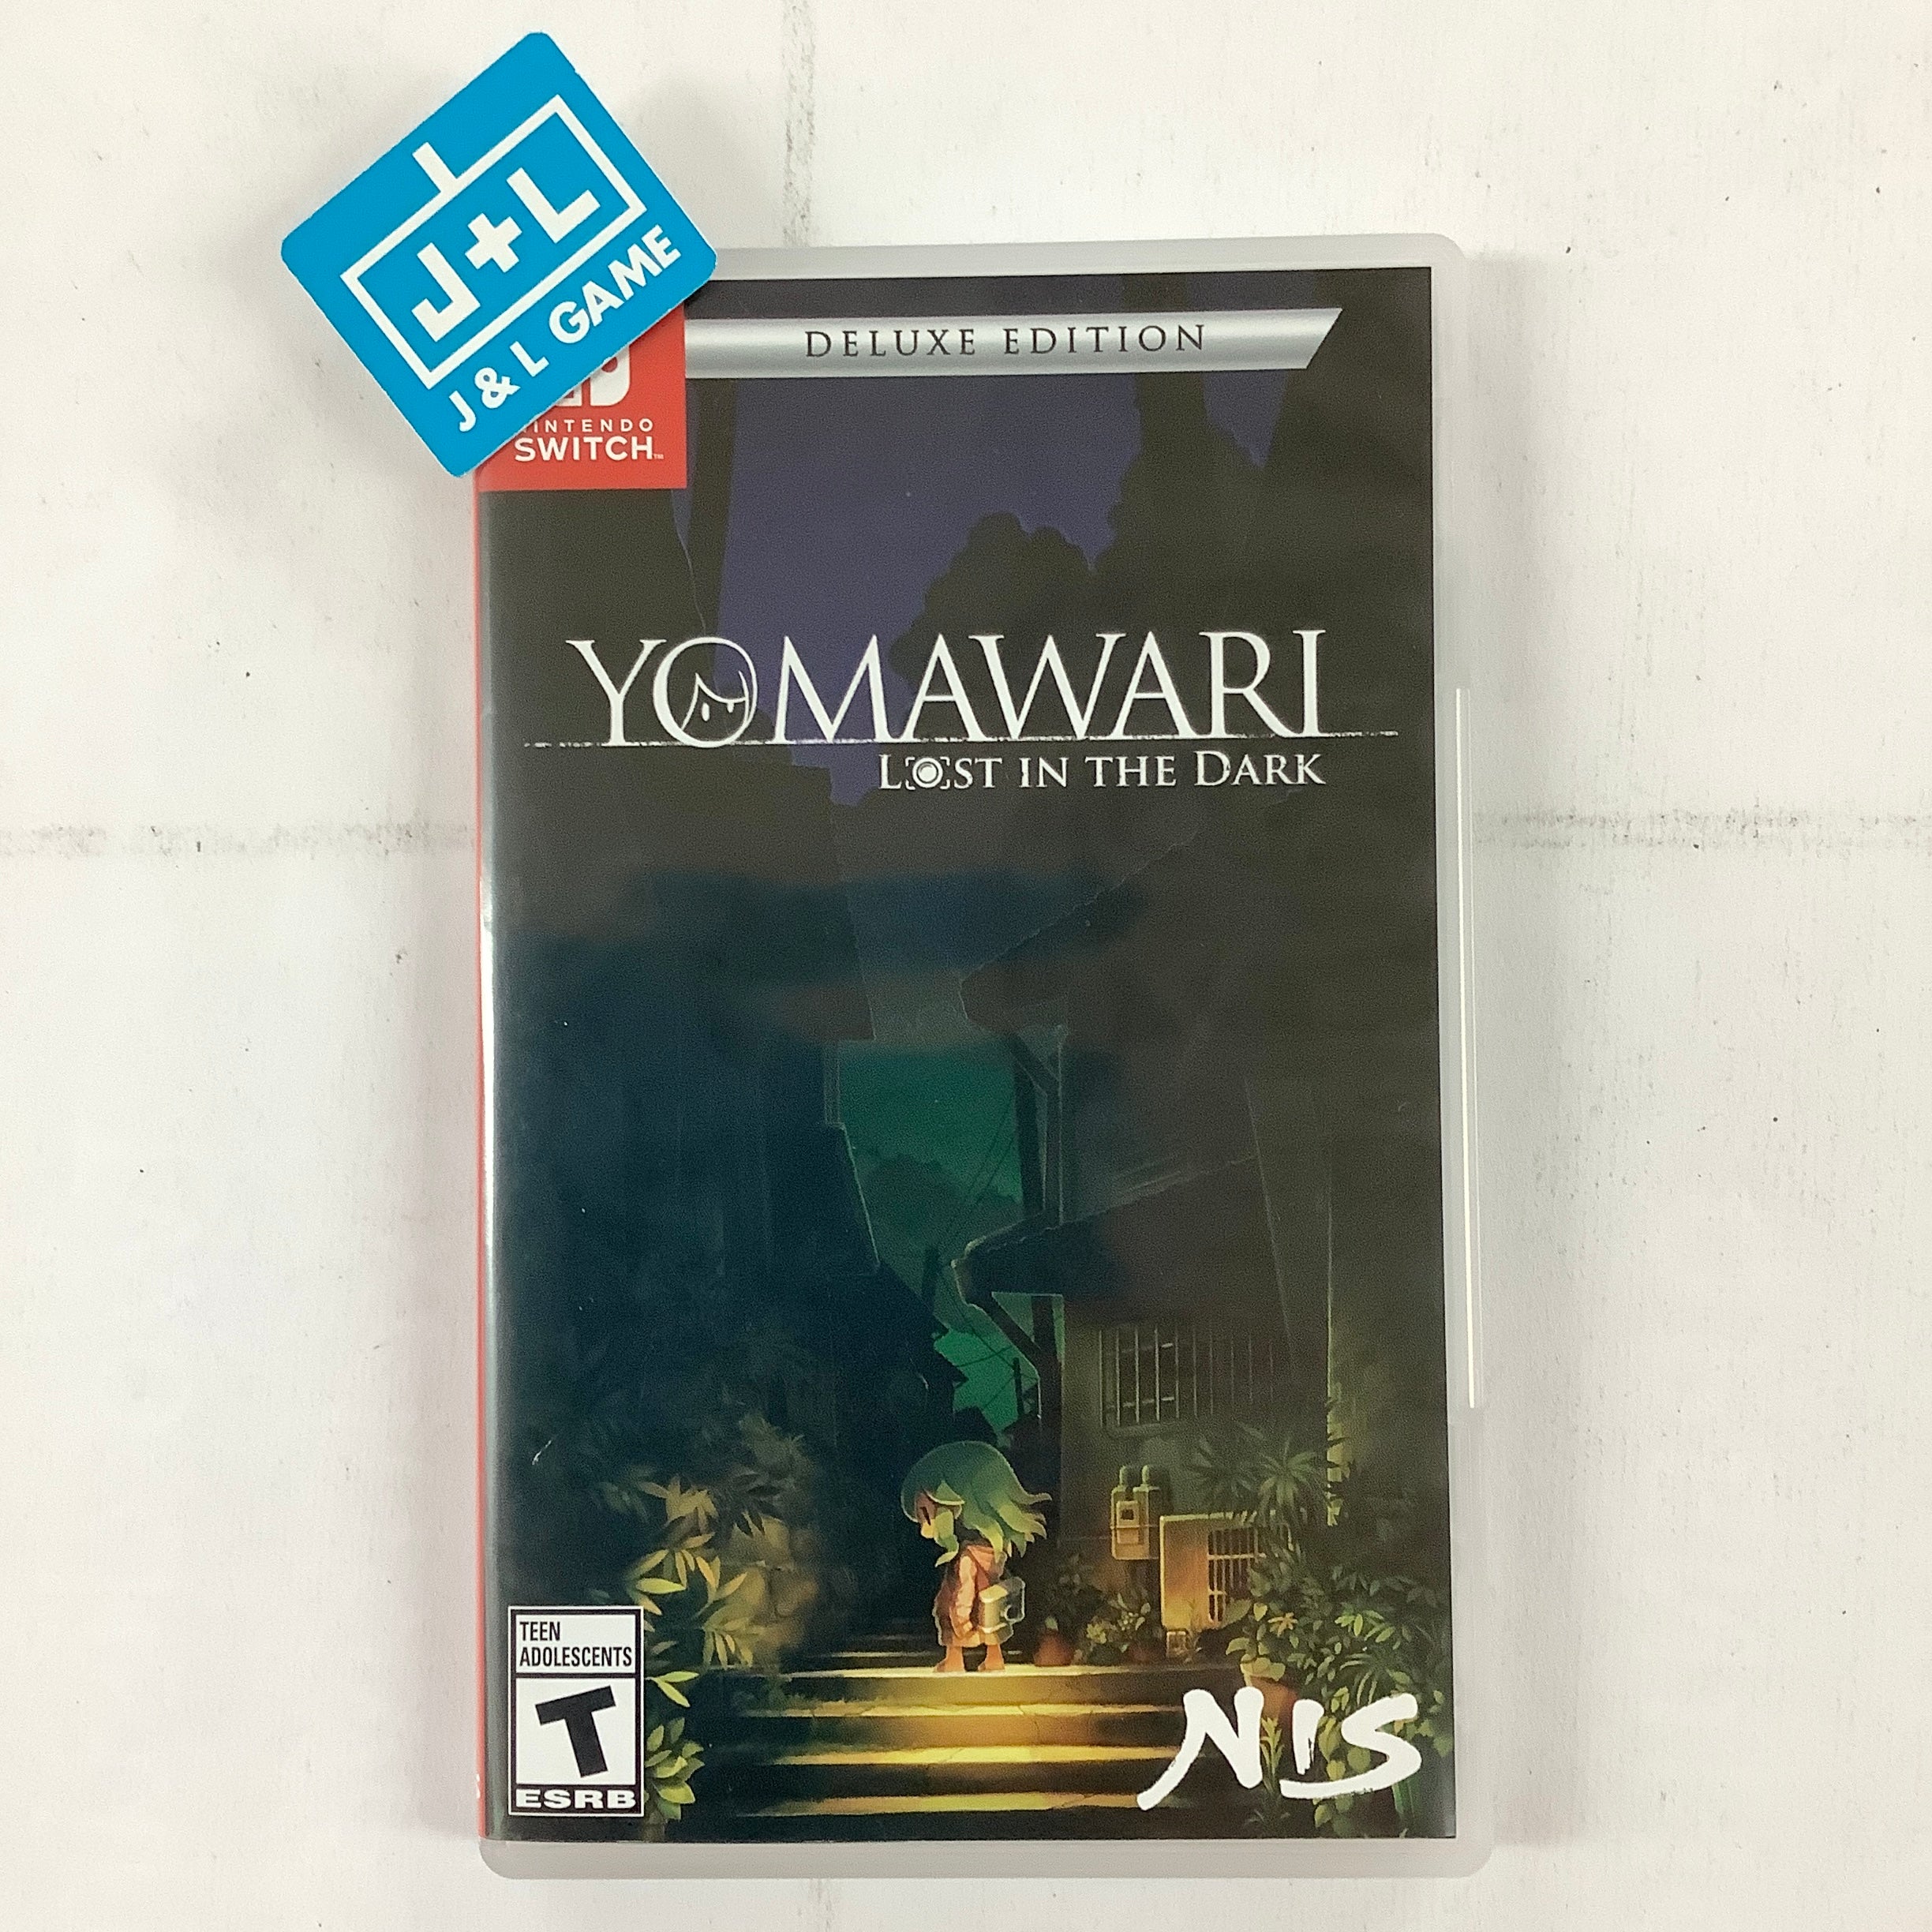 Yomawari: Lost in the Dark Deluxe Edition - (NSW) Nintendo Switch [UNBOXING] Video Games NIS America   